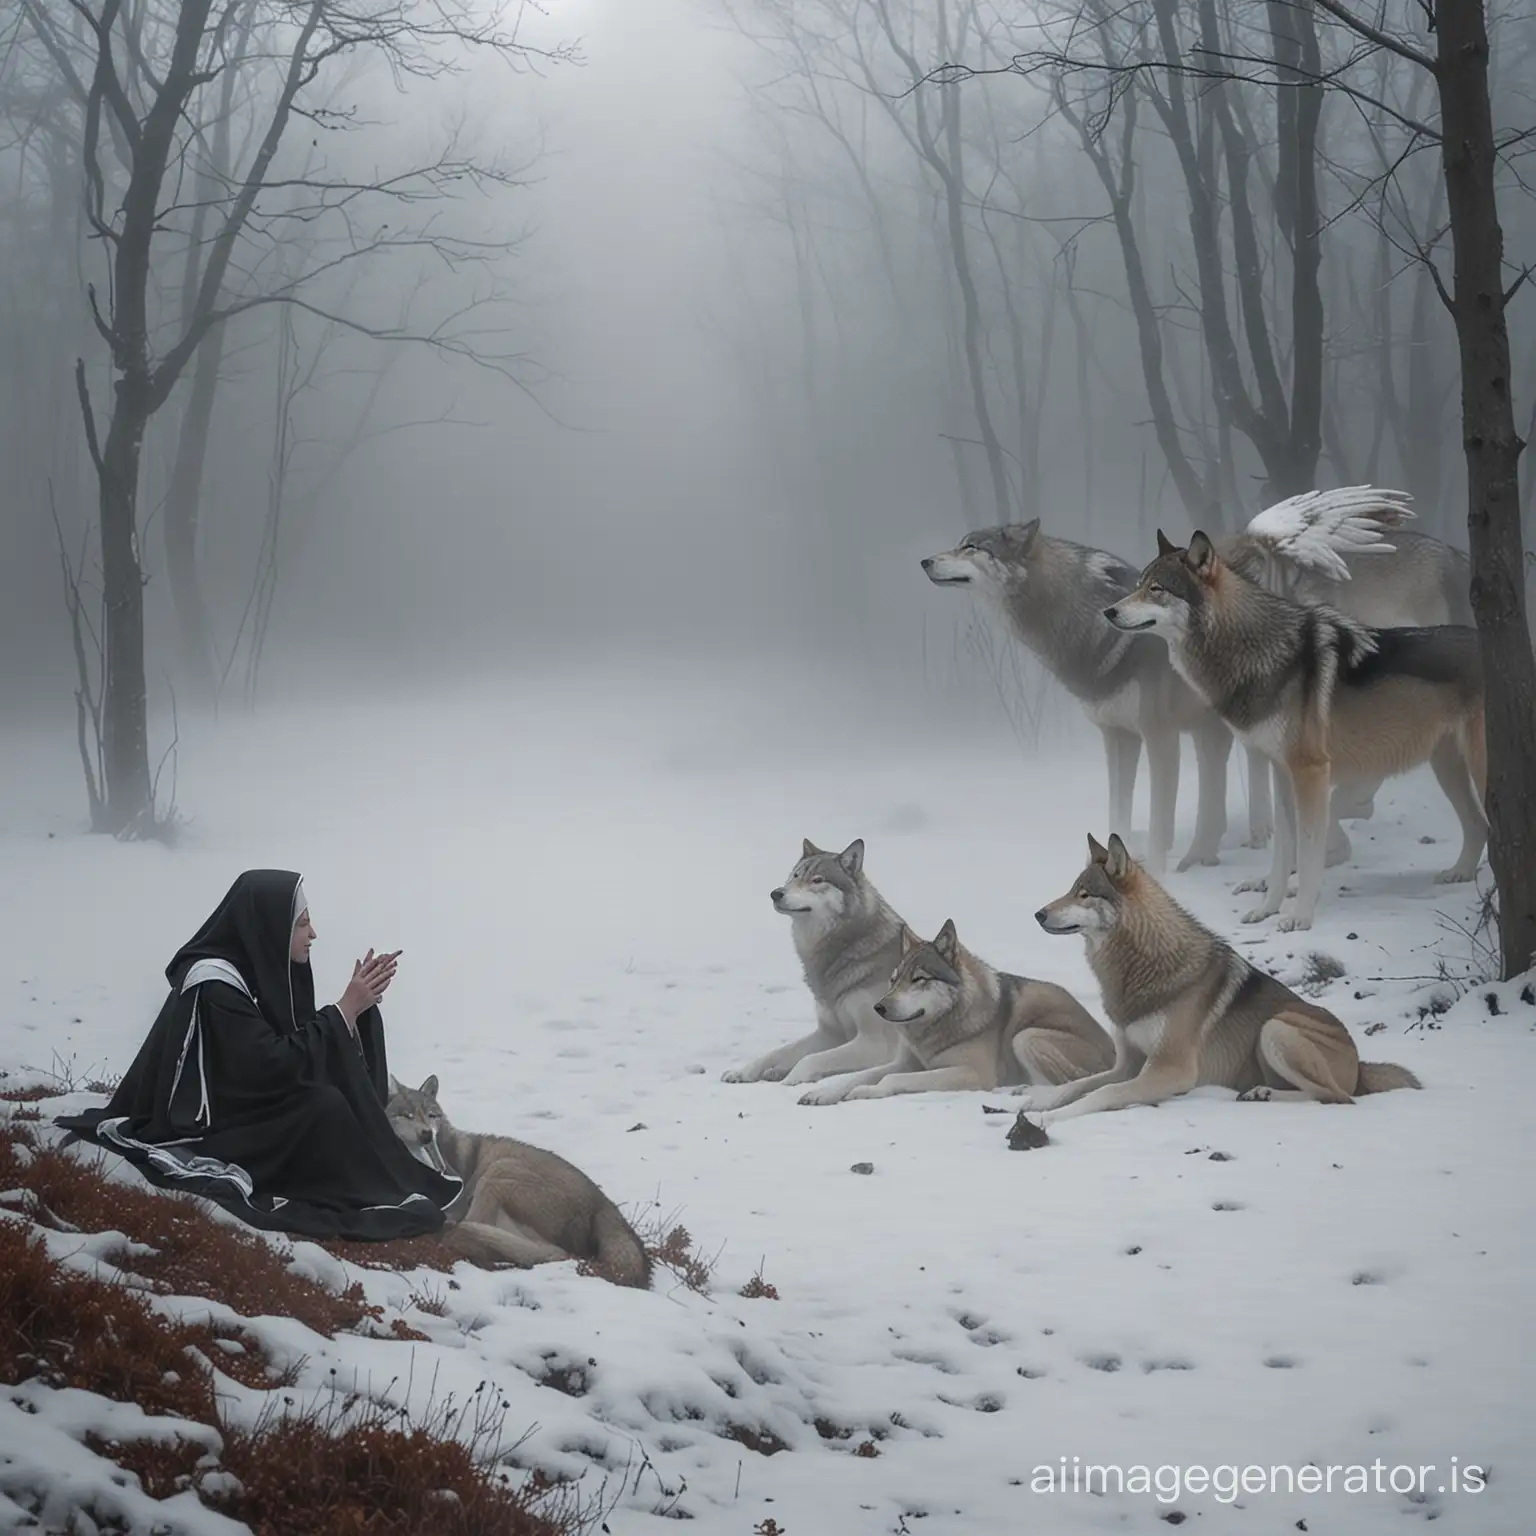 Guardian-Nun-with-Angelic-Wings-Overseeing-Sleeping-Wolfmaiden-and-Her-Wolf-Pack-in-Enshrouding-Fog